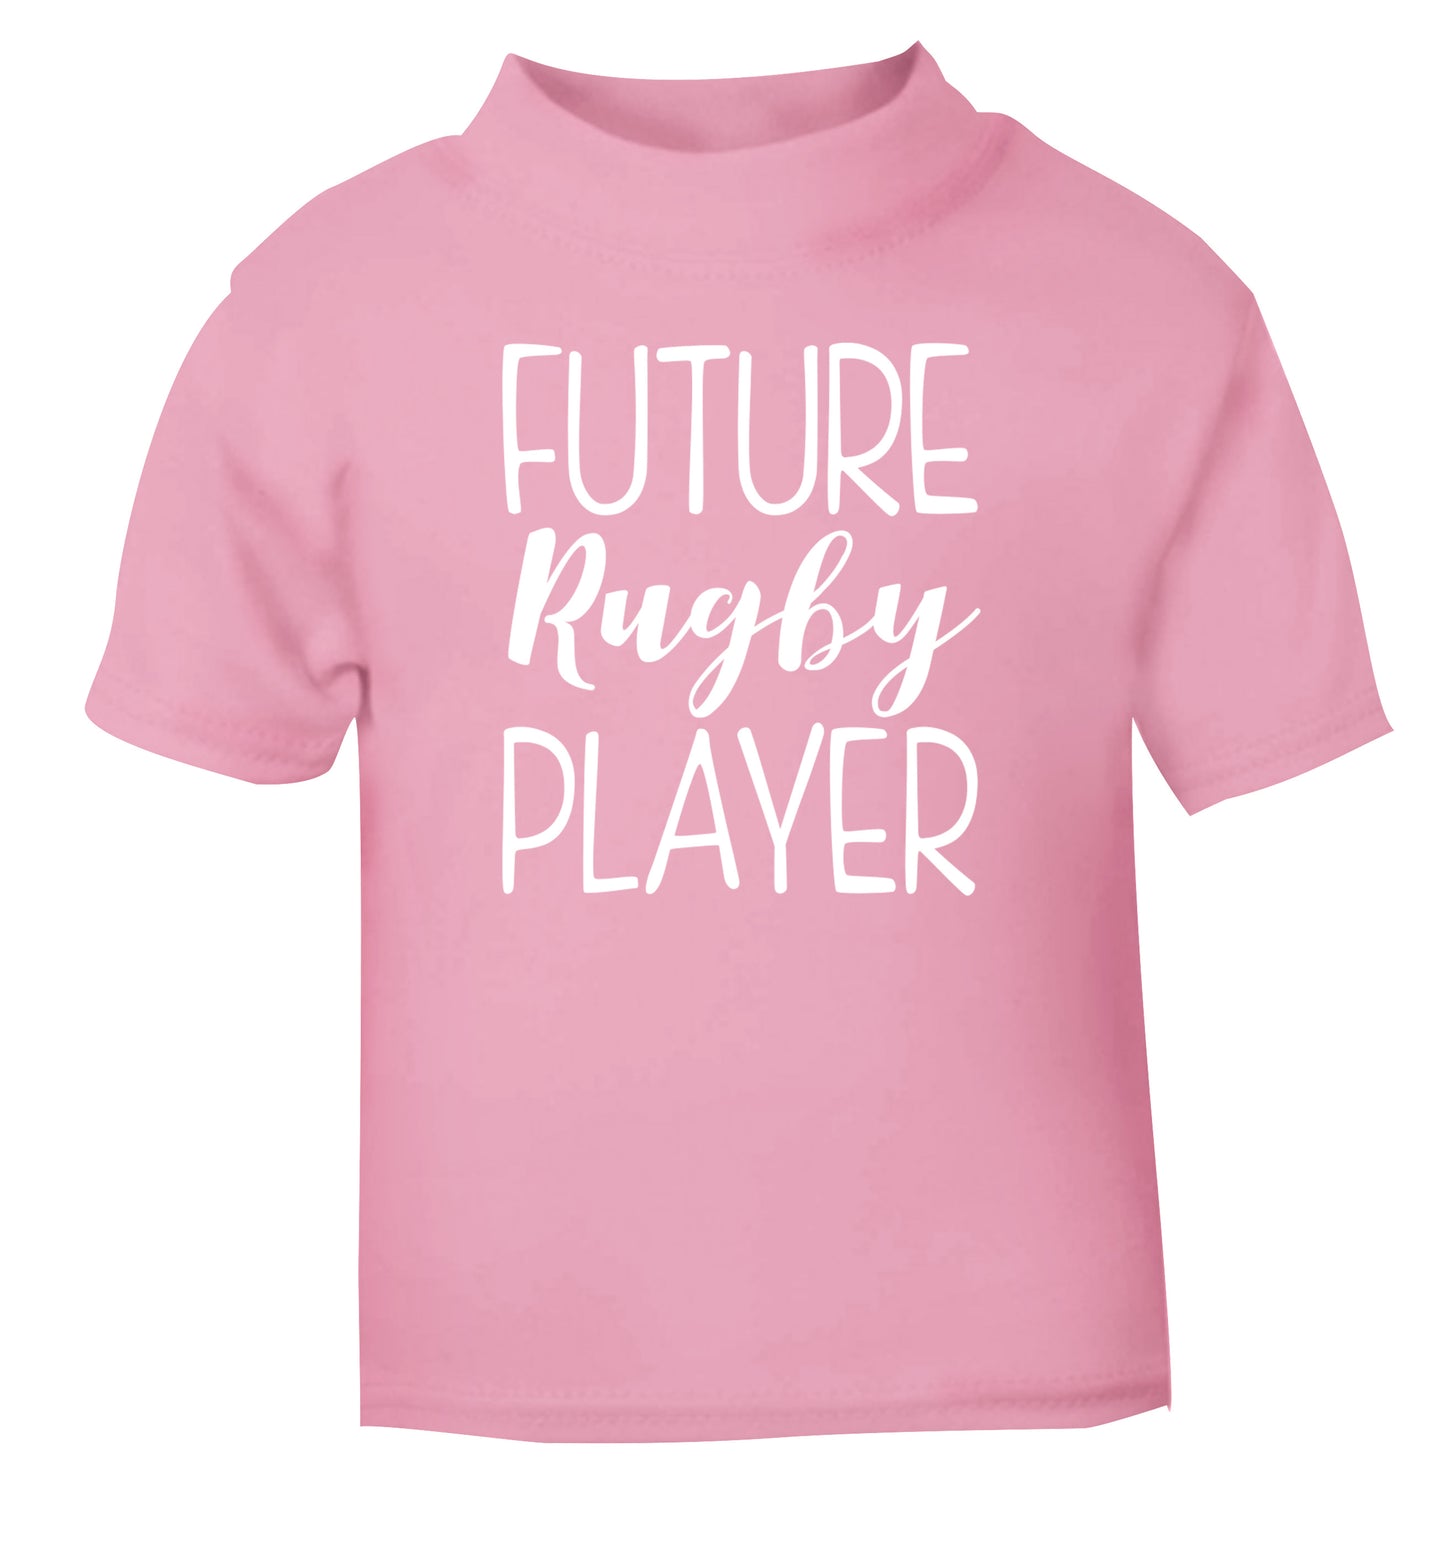 Future rugby player light pink Baby Toddler Tshirt 2 Years